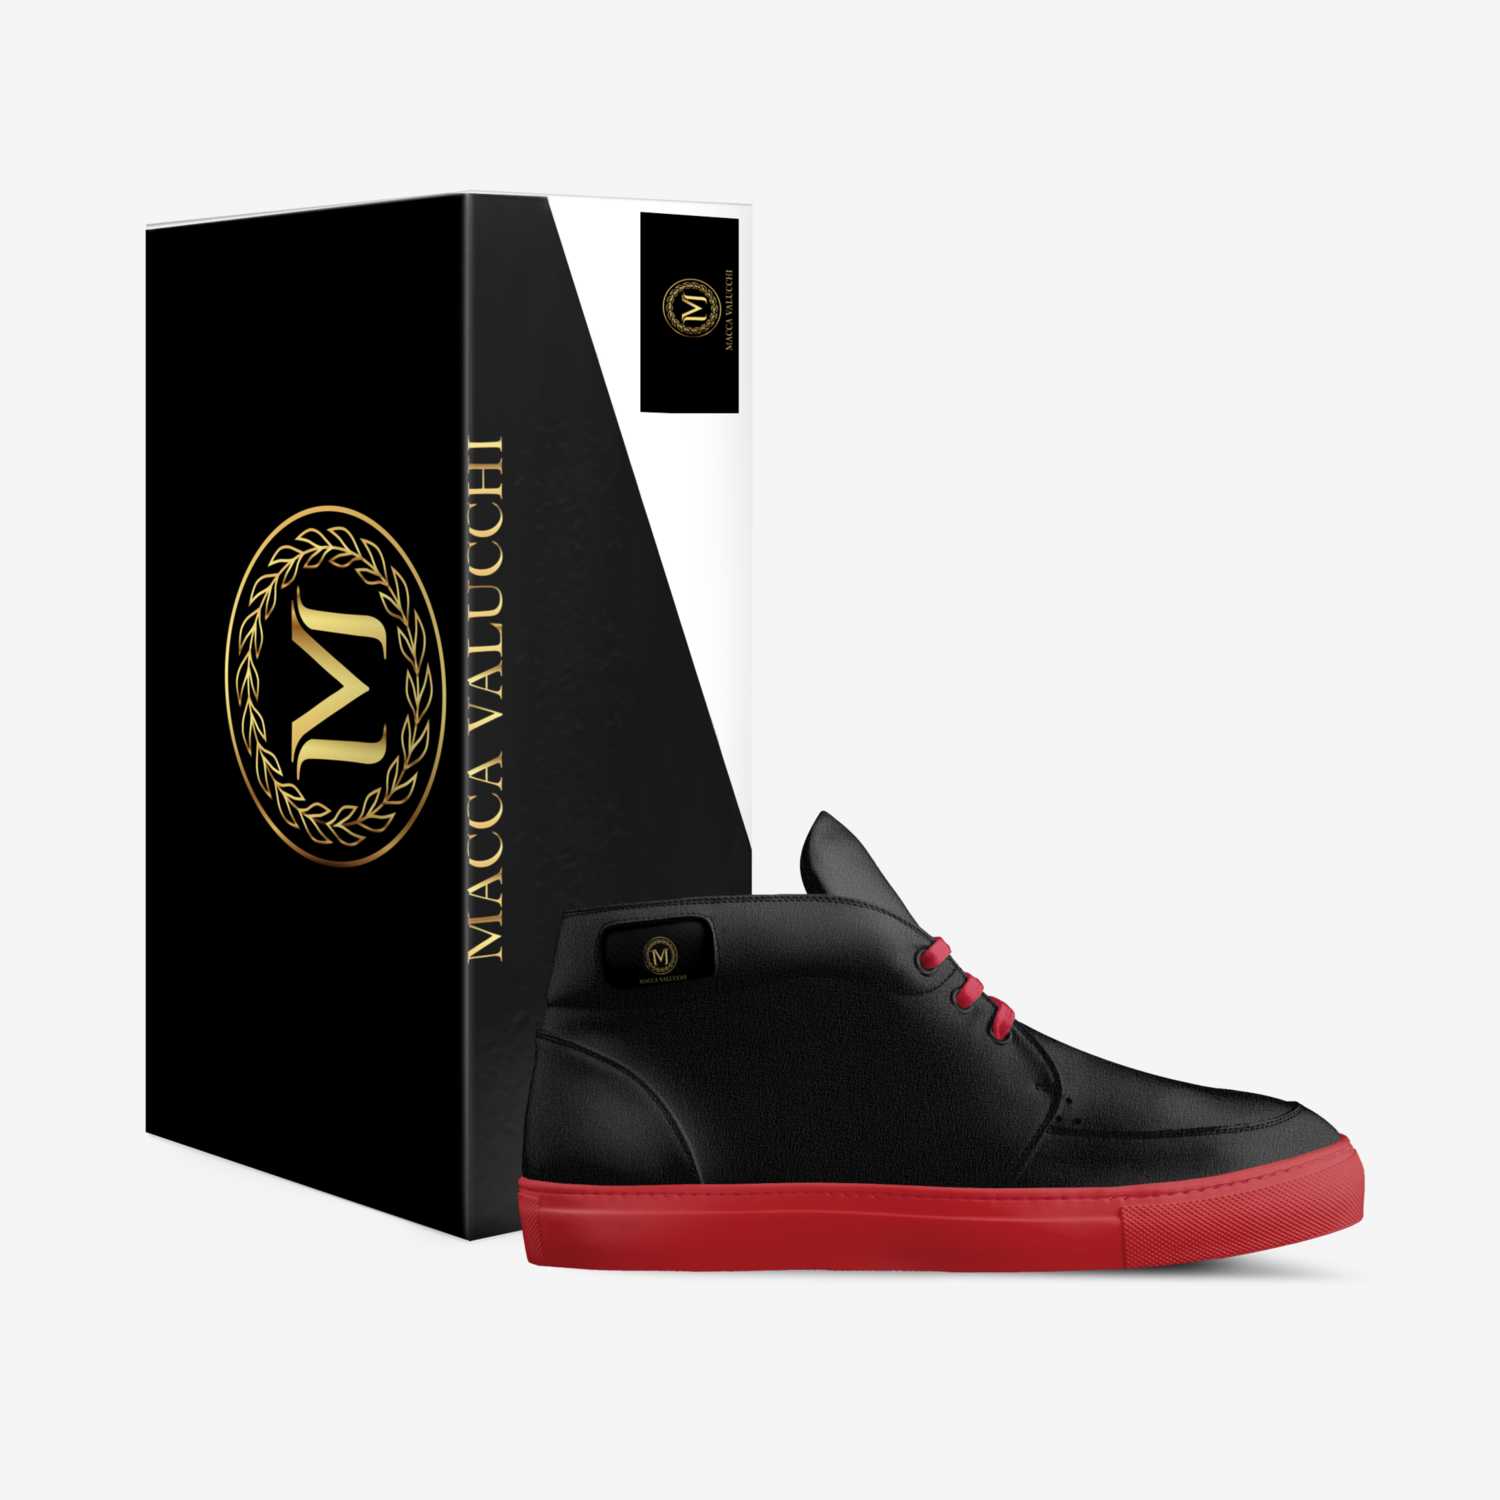 Rayo custom made in Italy shoes by M M | Box view